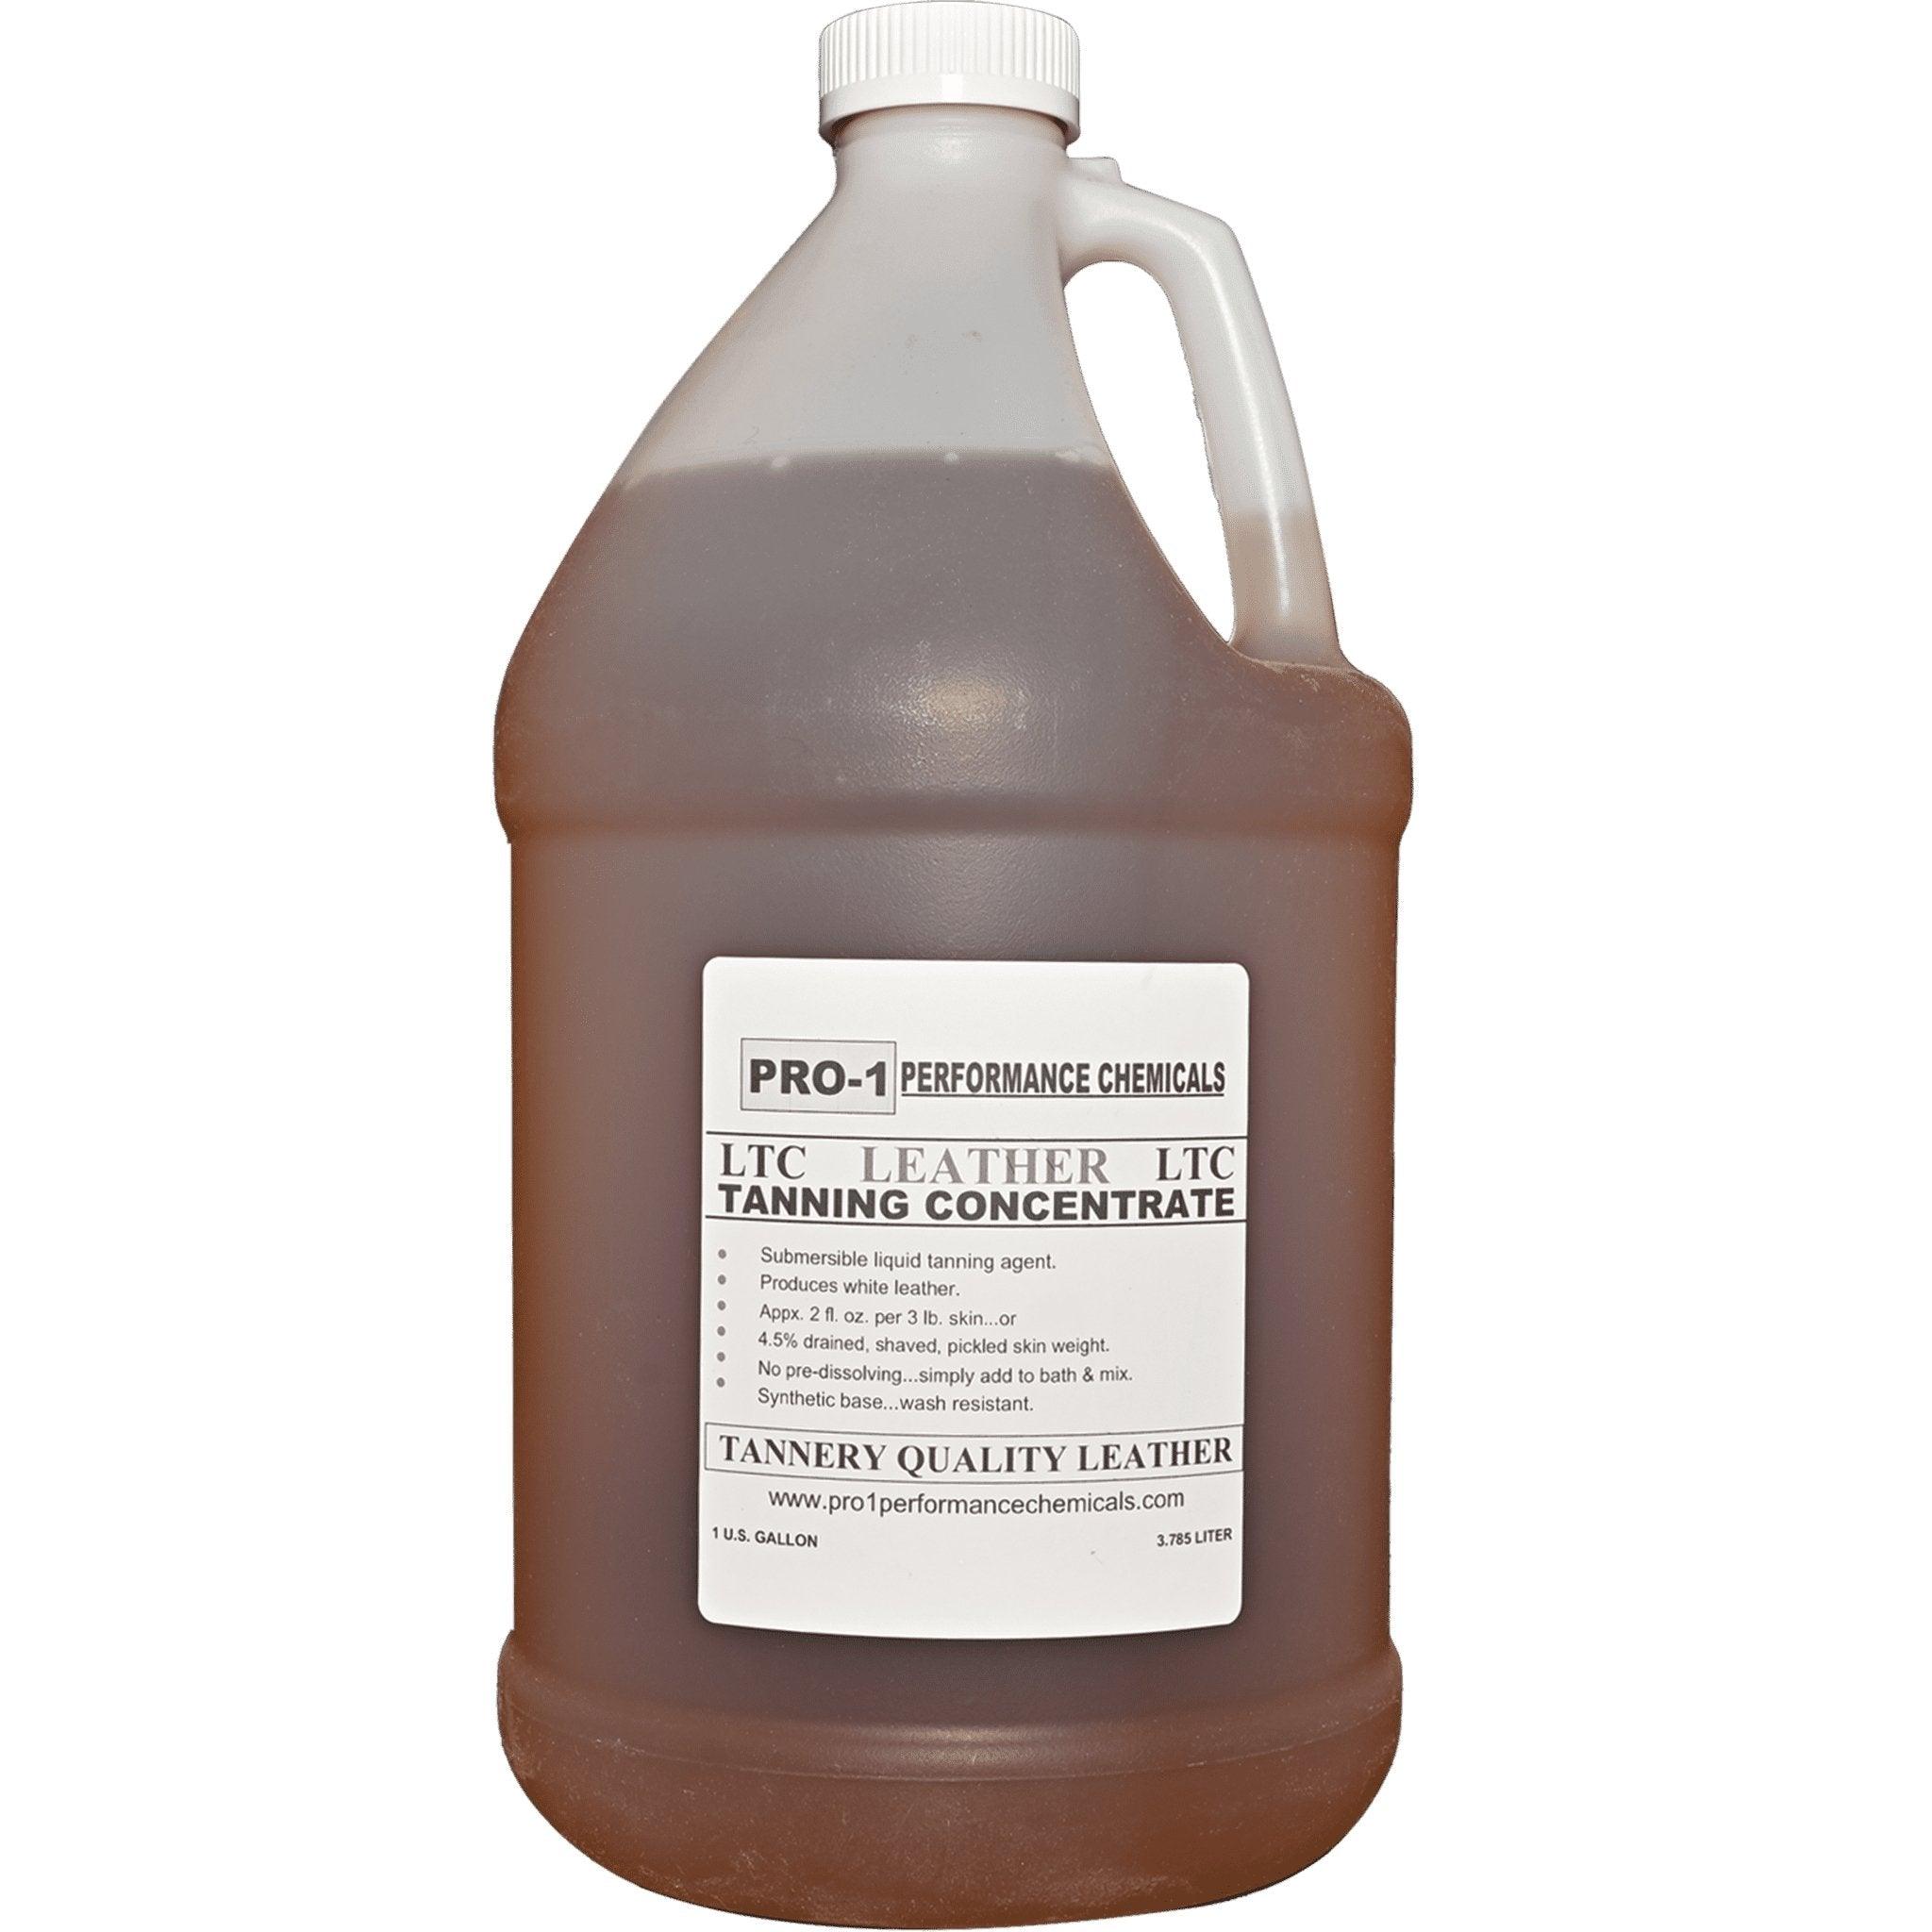 Pro-1 Leather Tanning Concentrate - Matuska Taxidermy Supply Company